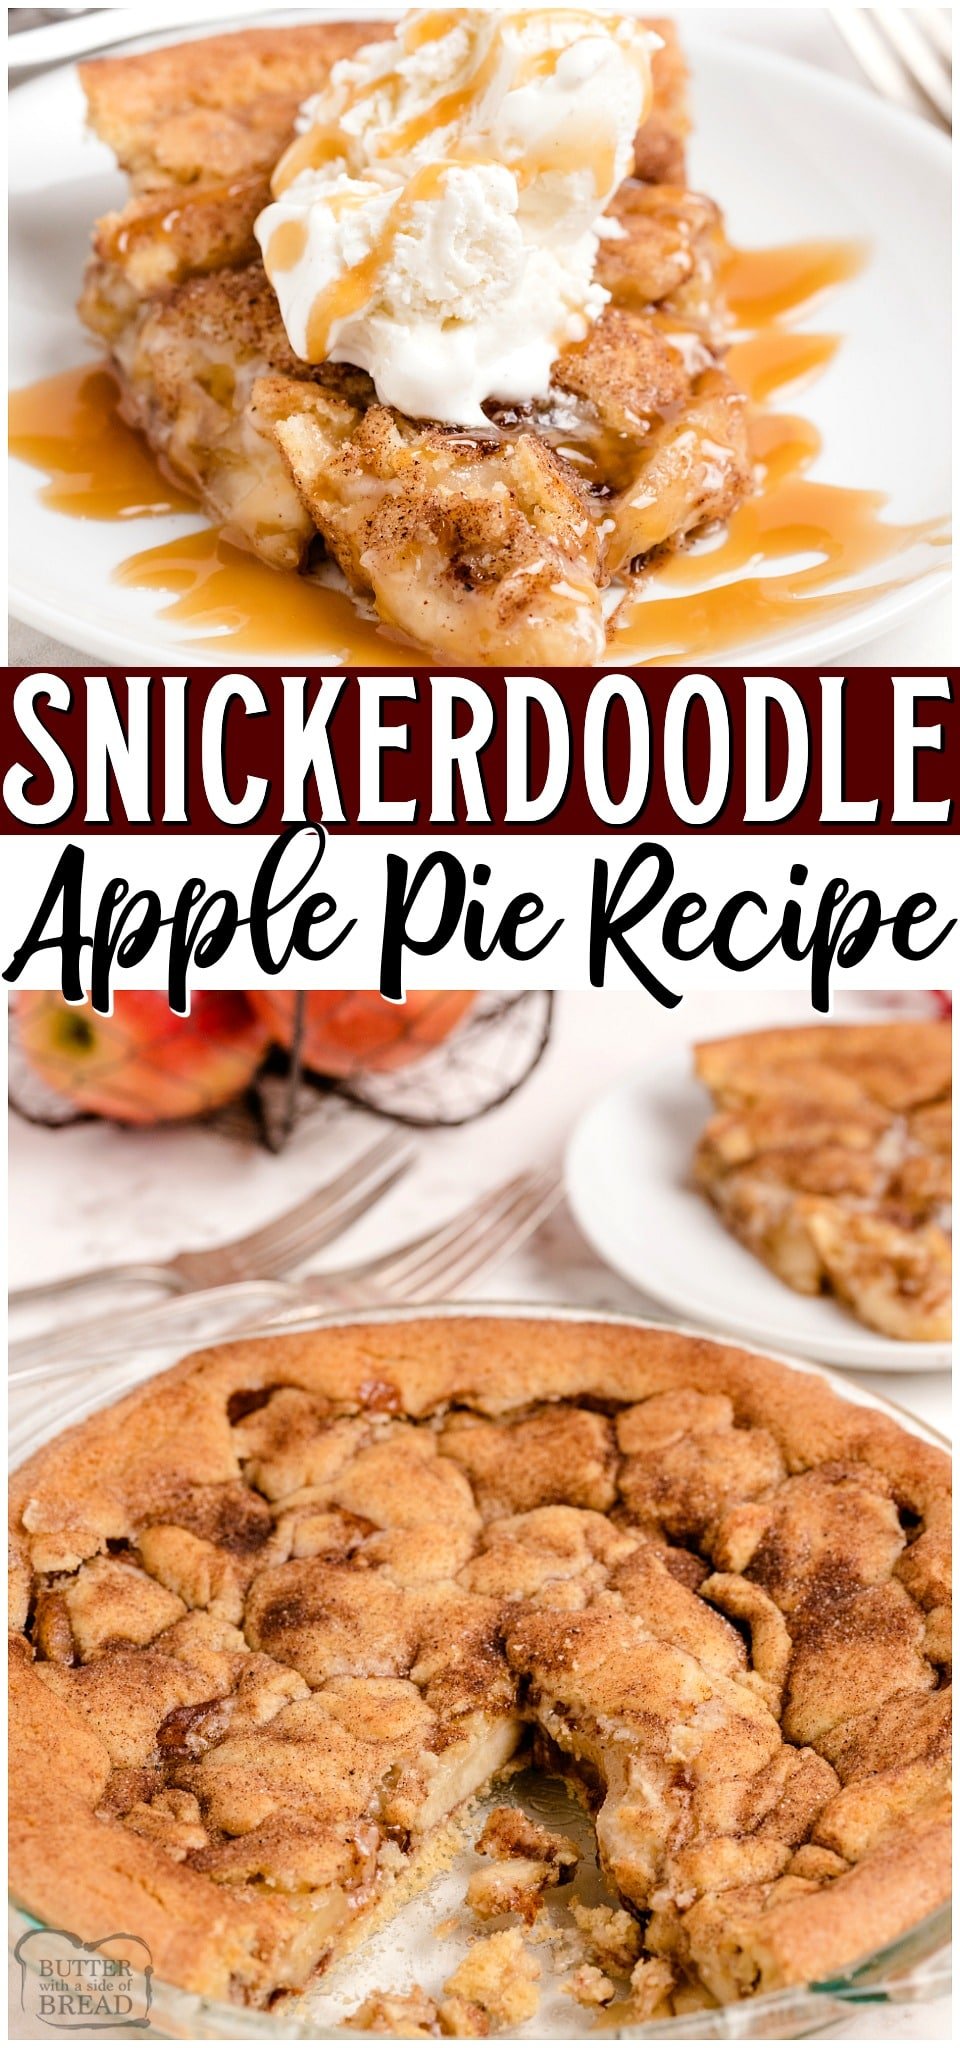 Snickerdoodle Apple Pie is a variation on classic Snickerdoodle cookies + apple pie! This fun take on a traditional apple pie recipe is perfect for Snickerdoodle lovers!